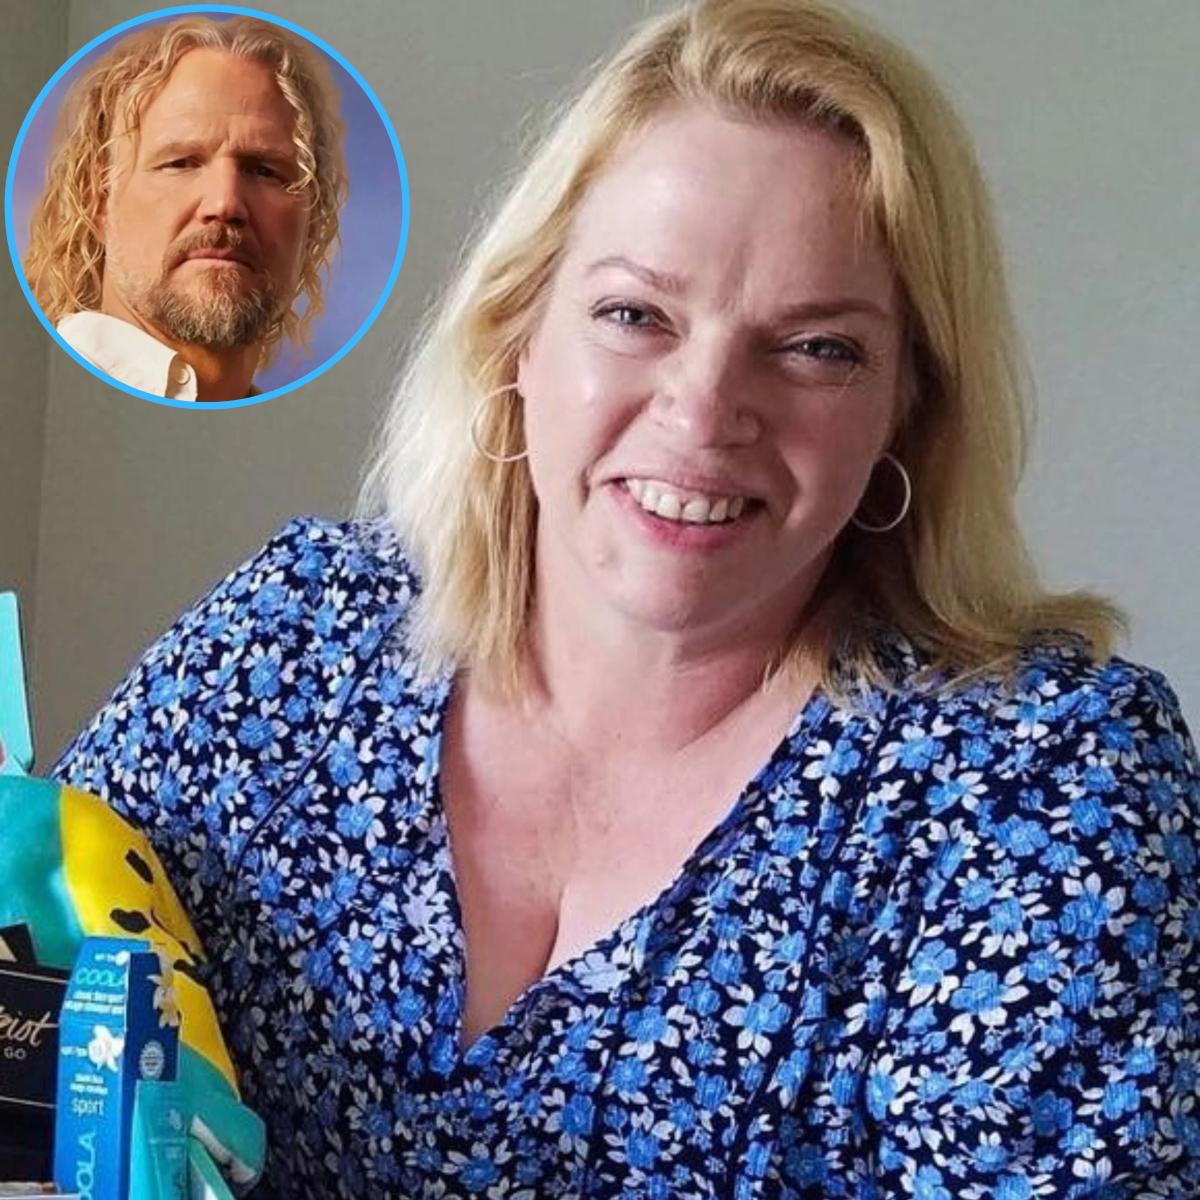 Sister Wives Janelle Brown Returns To Social Media With Heartwarming Post Amid Kody Split 